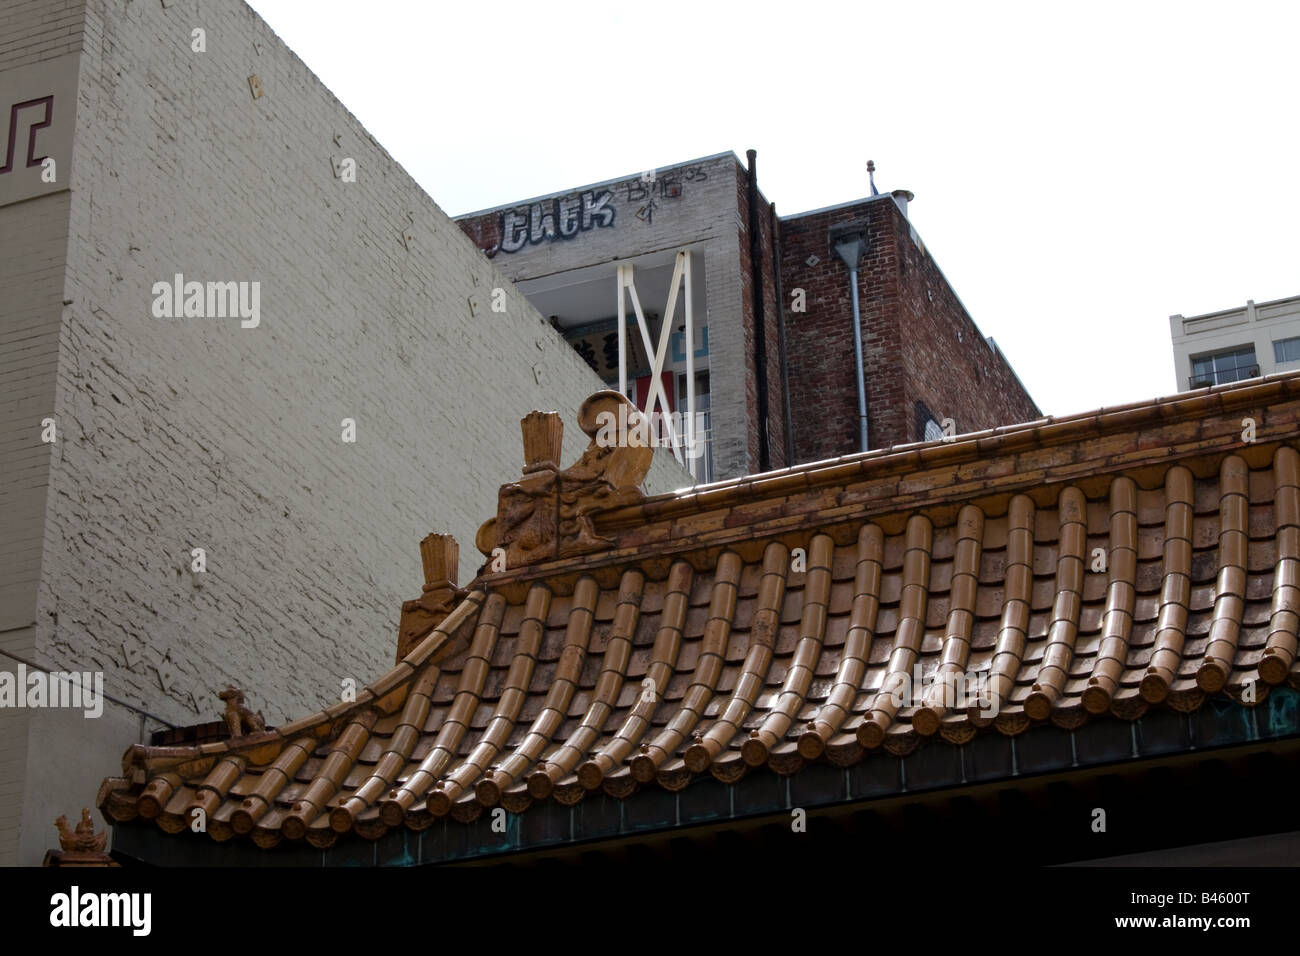 Detail of a building in Chinatown, San Francisco, California Stock Photo